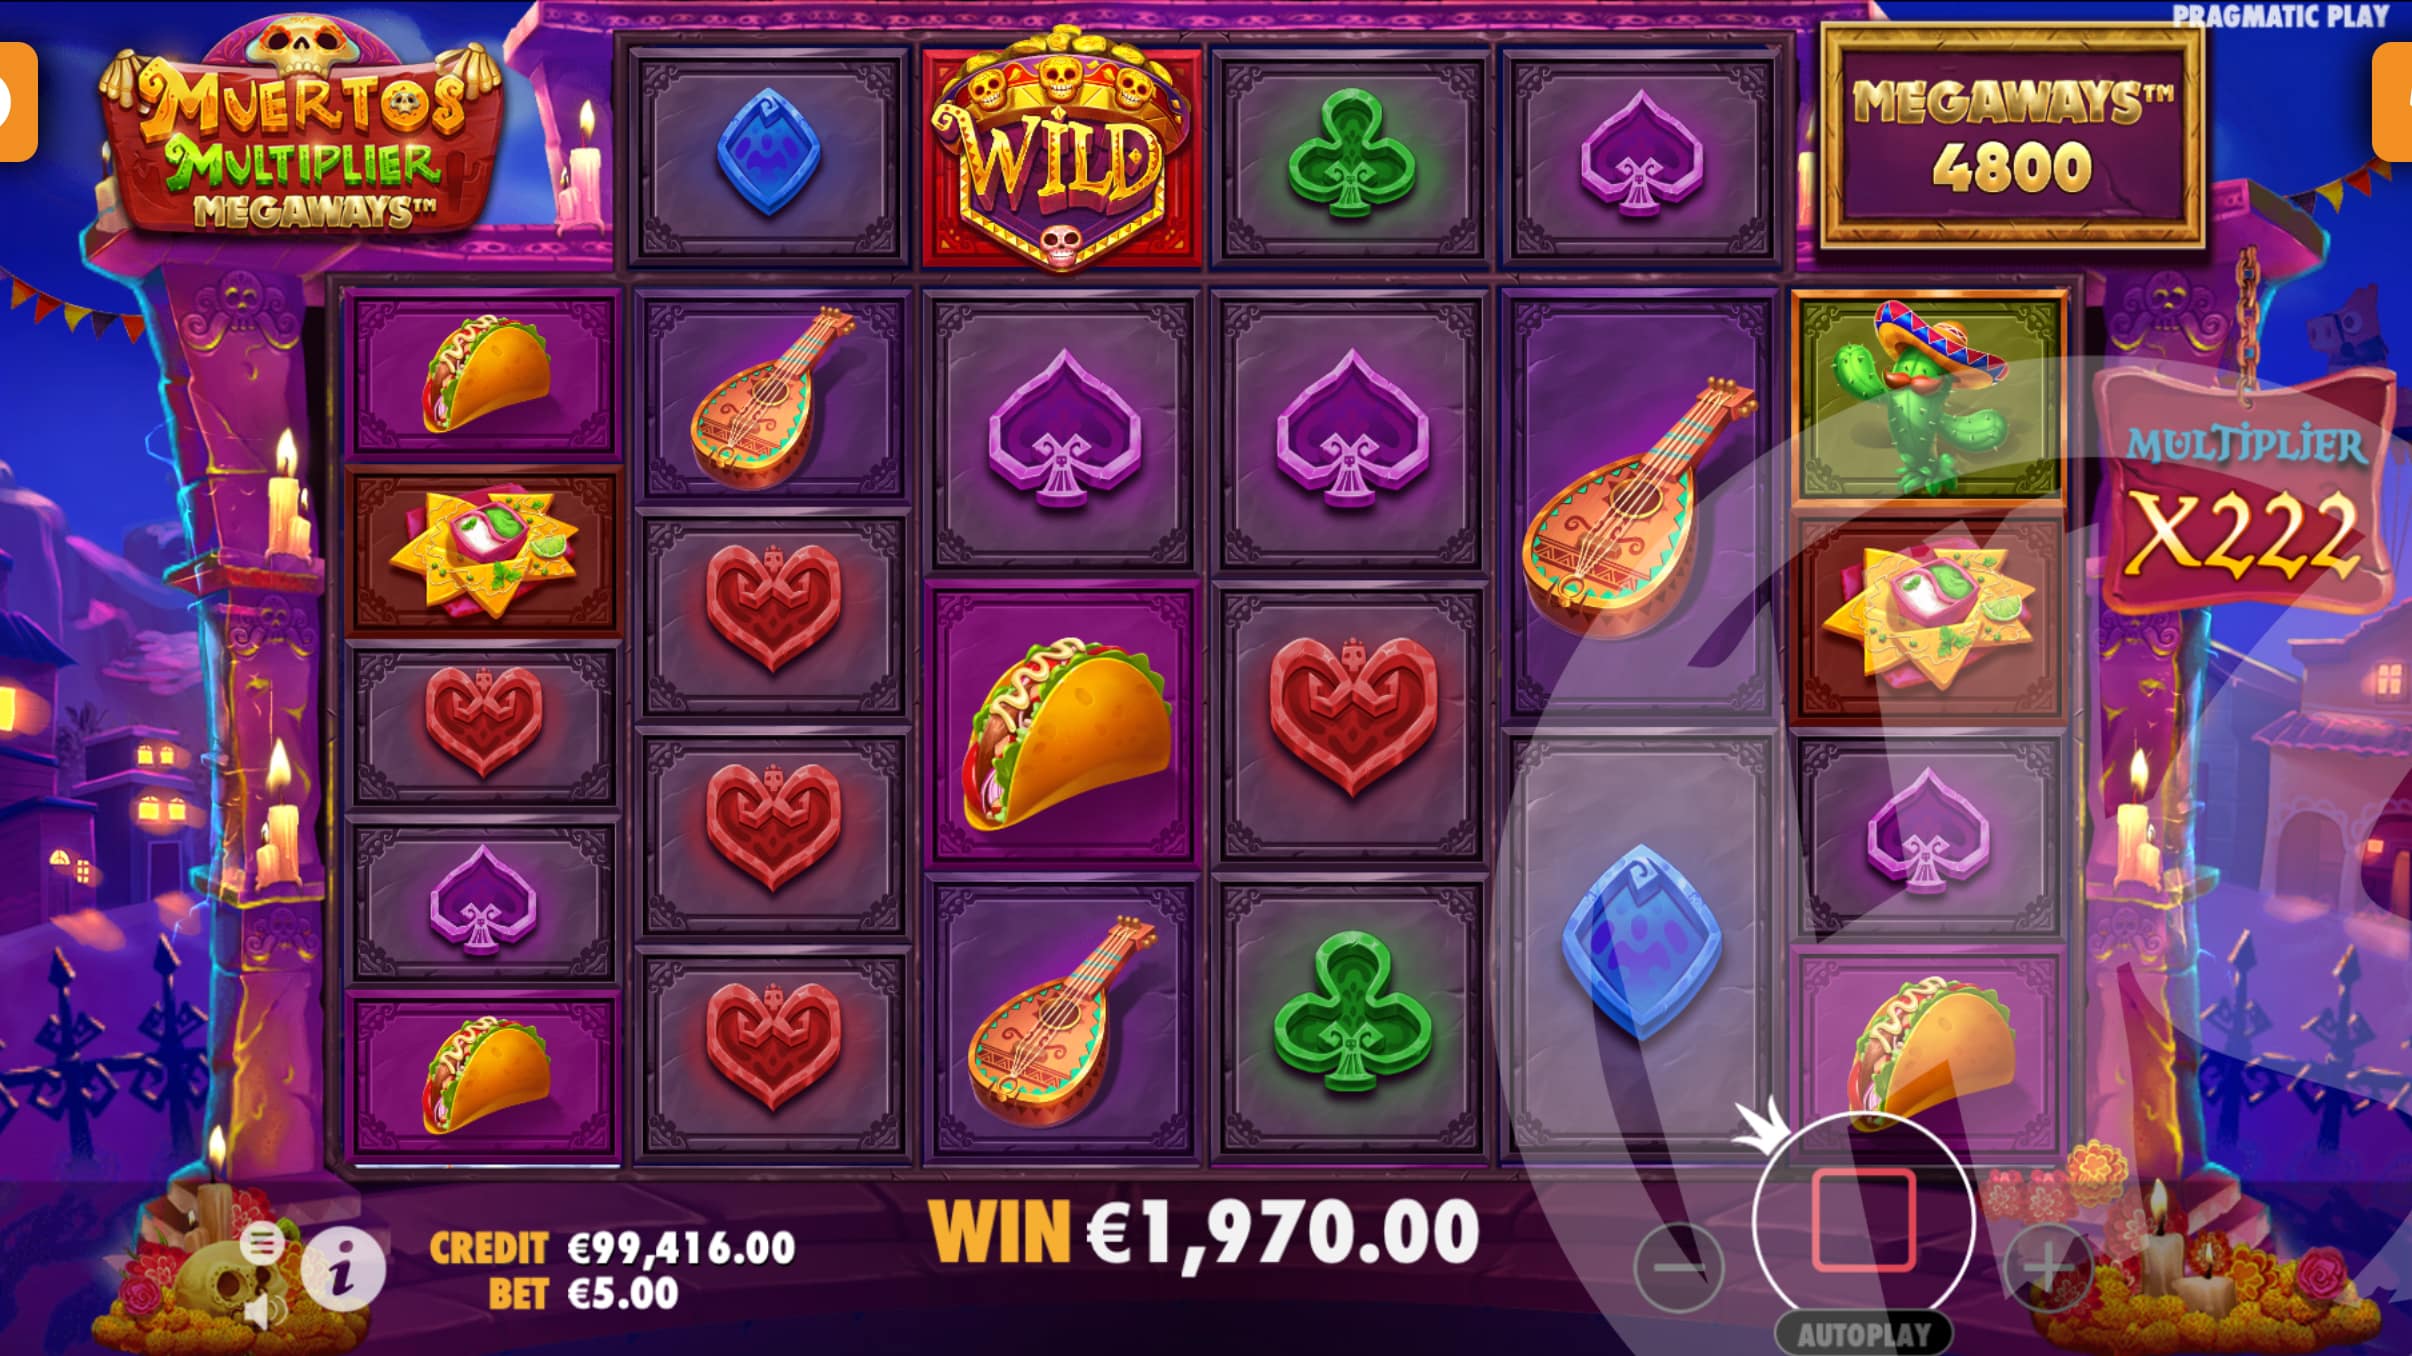 New Wilds Landing Multiplier the Current Win Multiplier Value, Which Does Not Reset During Free Spins